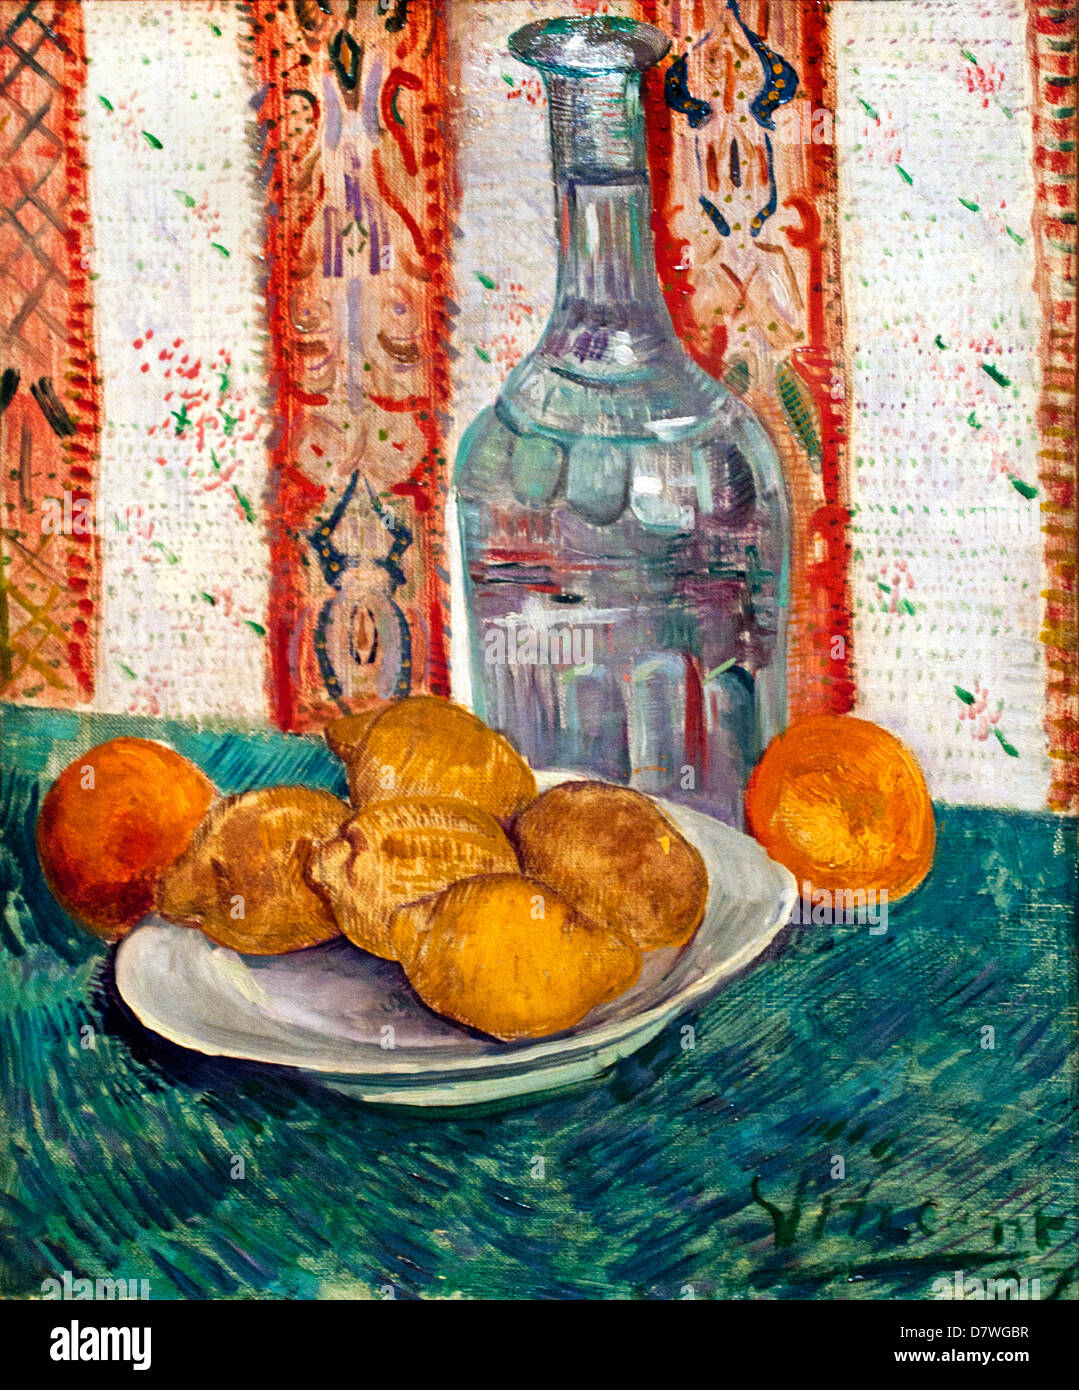 Still Life with Decanter and Lemons on a Plate 1887 Vincent van Gogh 1853 - 1890  Dutch The Netherlands Post Impressionism Stock Photo